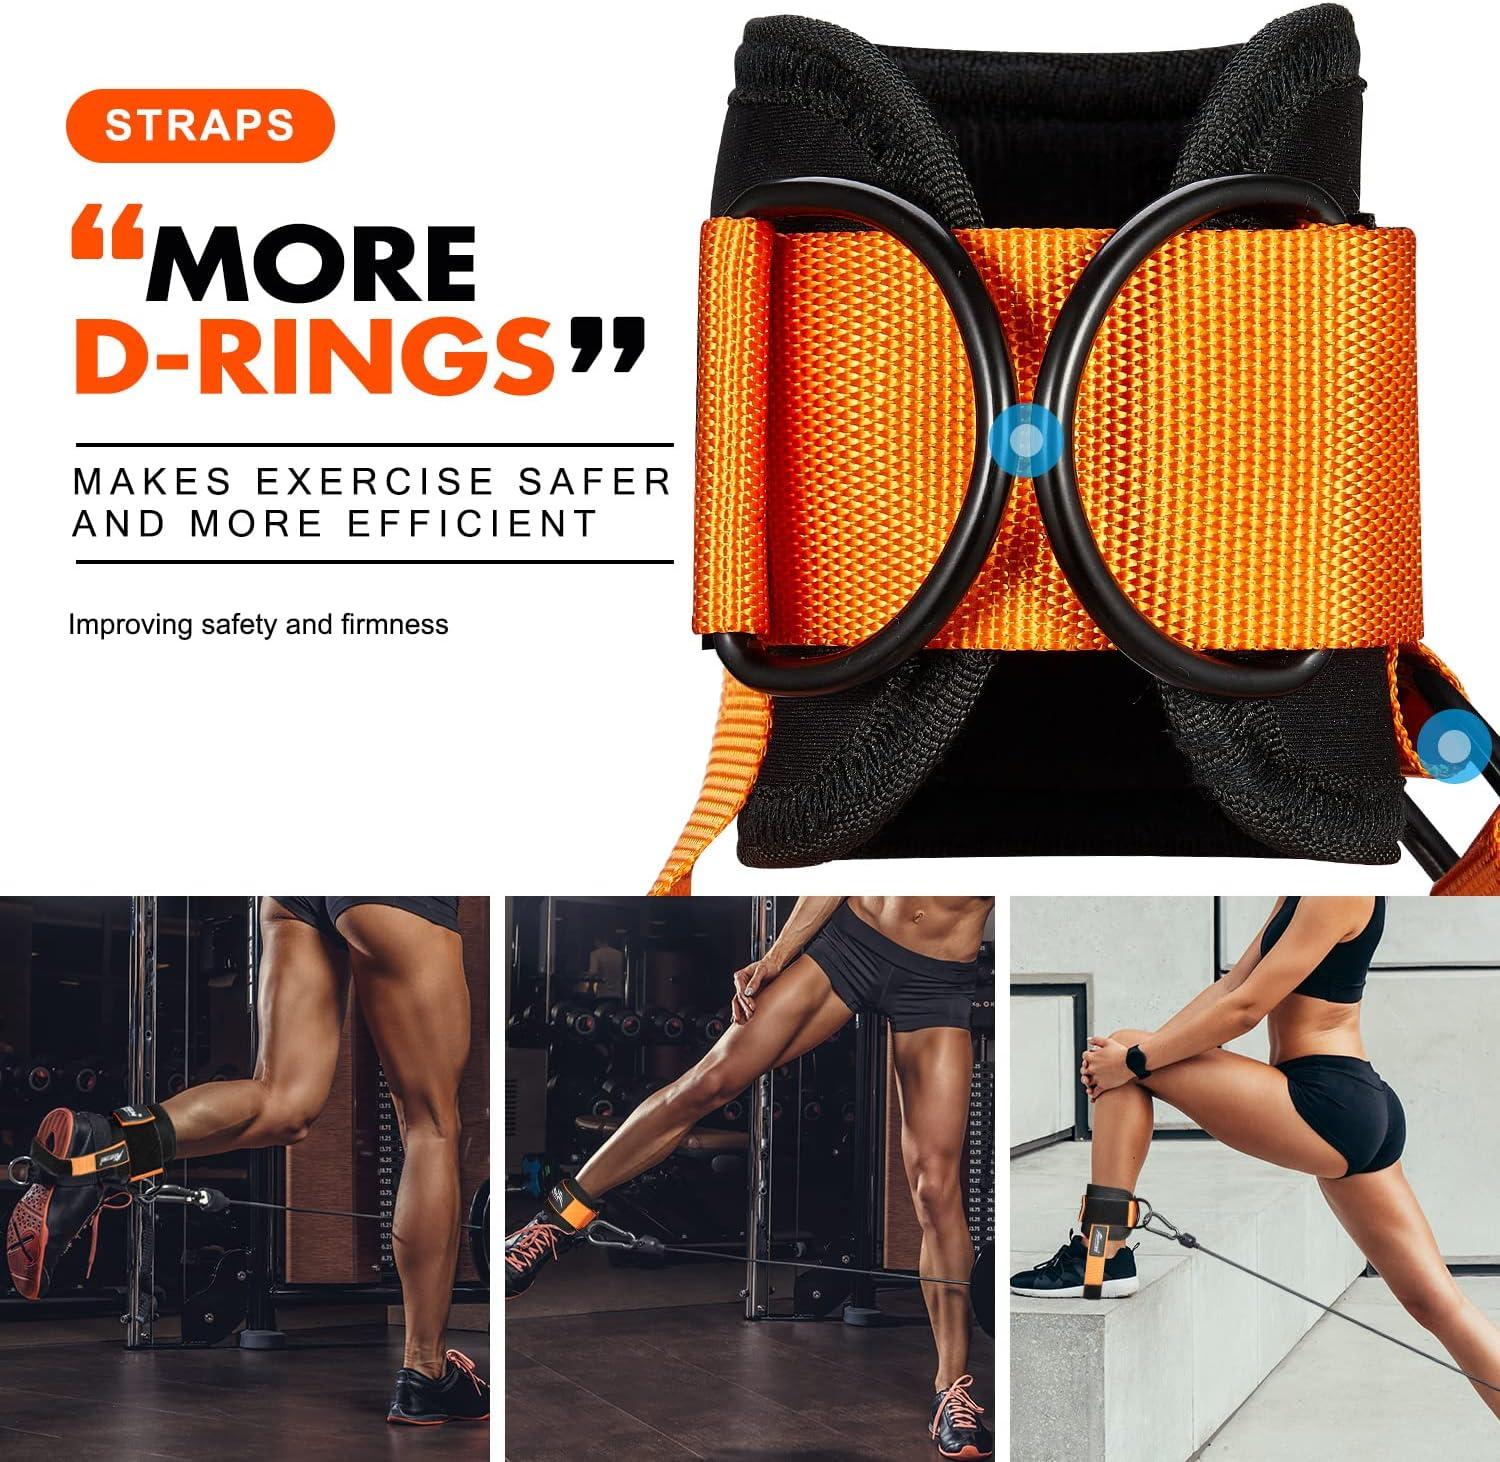 HPYGN Ankle Strap for Cable Machine, Padded Ankle Straps for Cable Machine  Kickbacks, Glute Workouts, Leg Extensions, Curls, Booty Hip Abductors  Exercise, Adjustable Comfort Ankle Cuff for Gym NEW